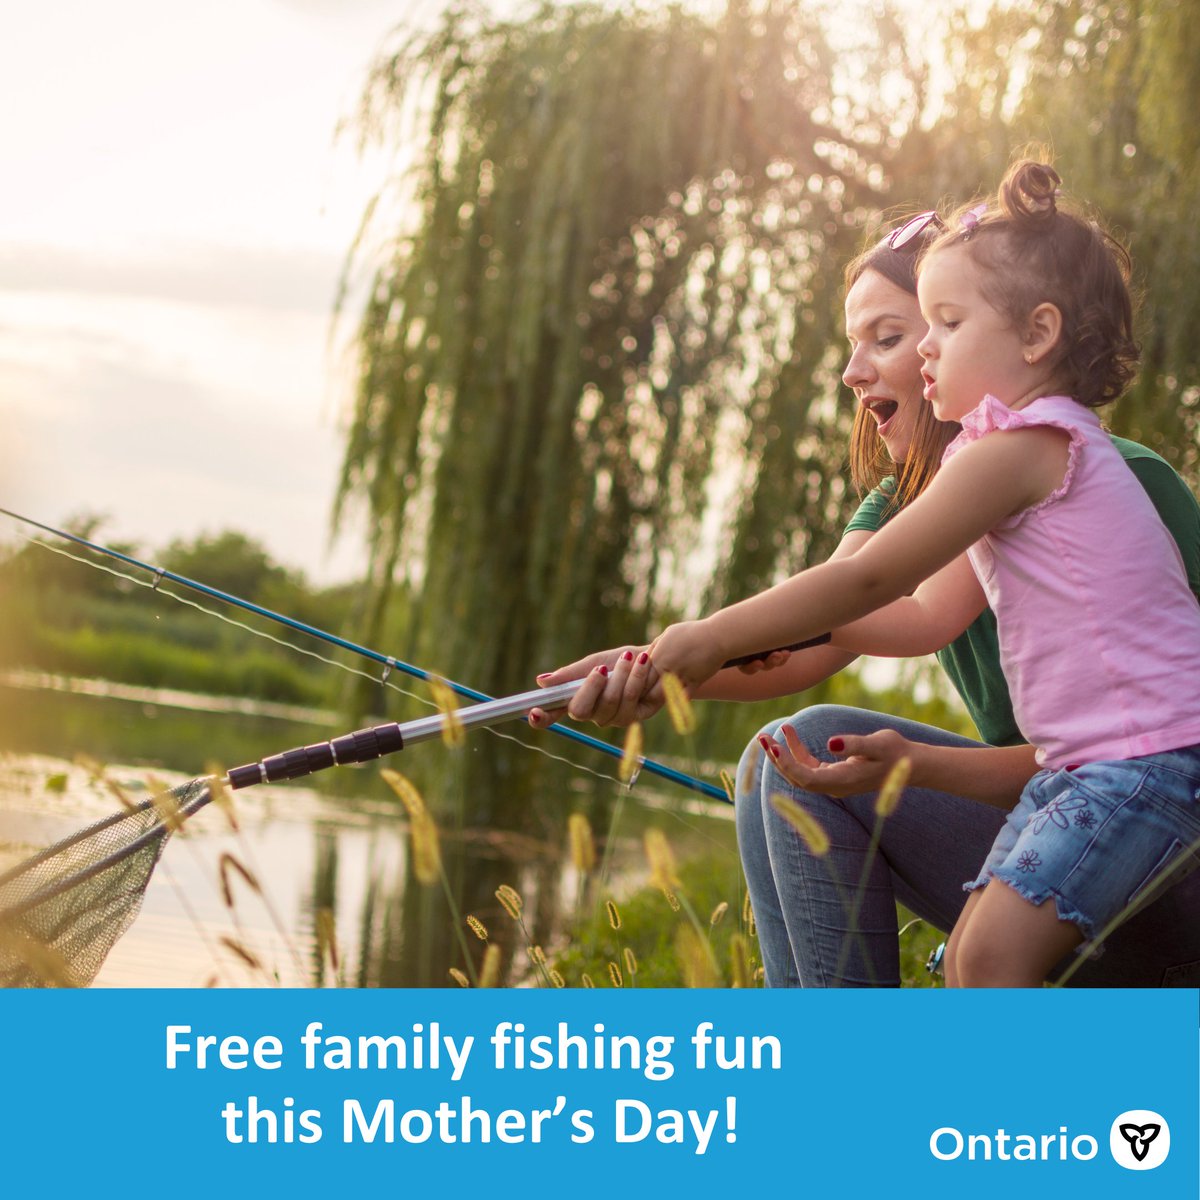 Give the gift of Ontario’s great outdoors with free family fishing this Mother’s Day weekend. Experience the vast fishing opportunities available in #Dufferin-#Caledon and across the province. Learn more: Ontario.ca/freefishing